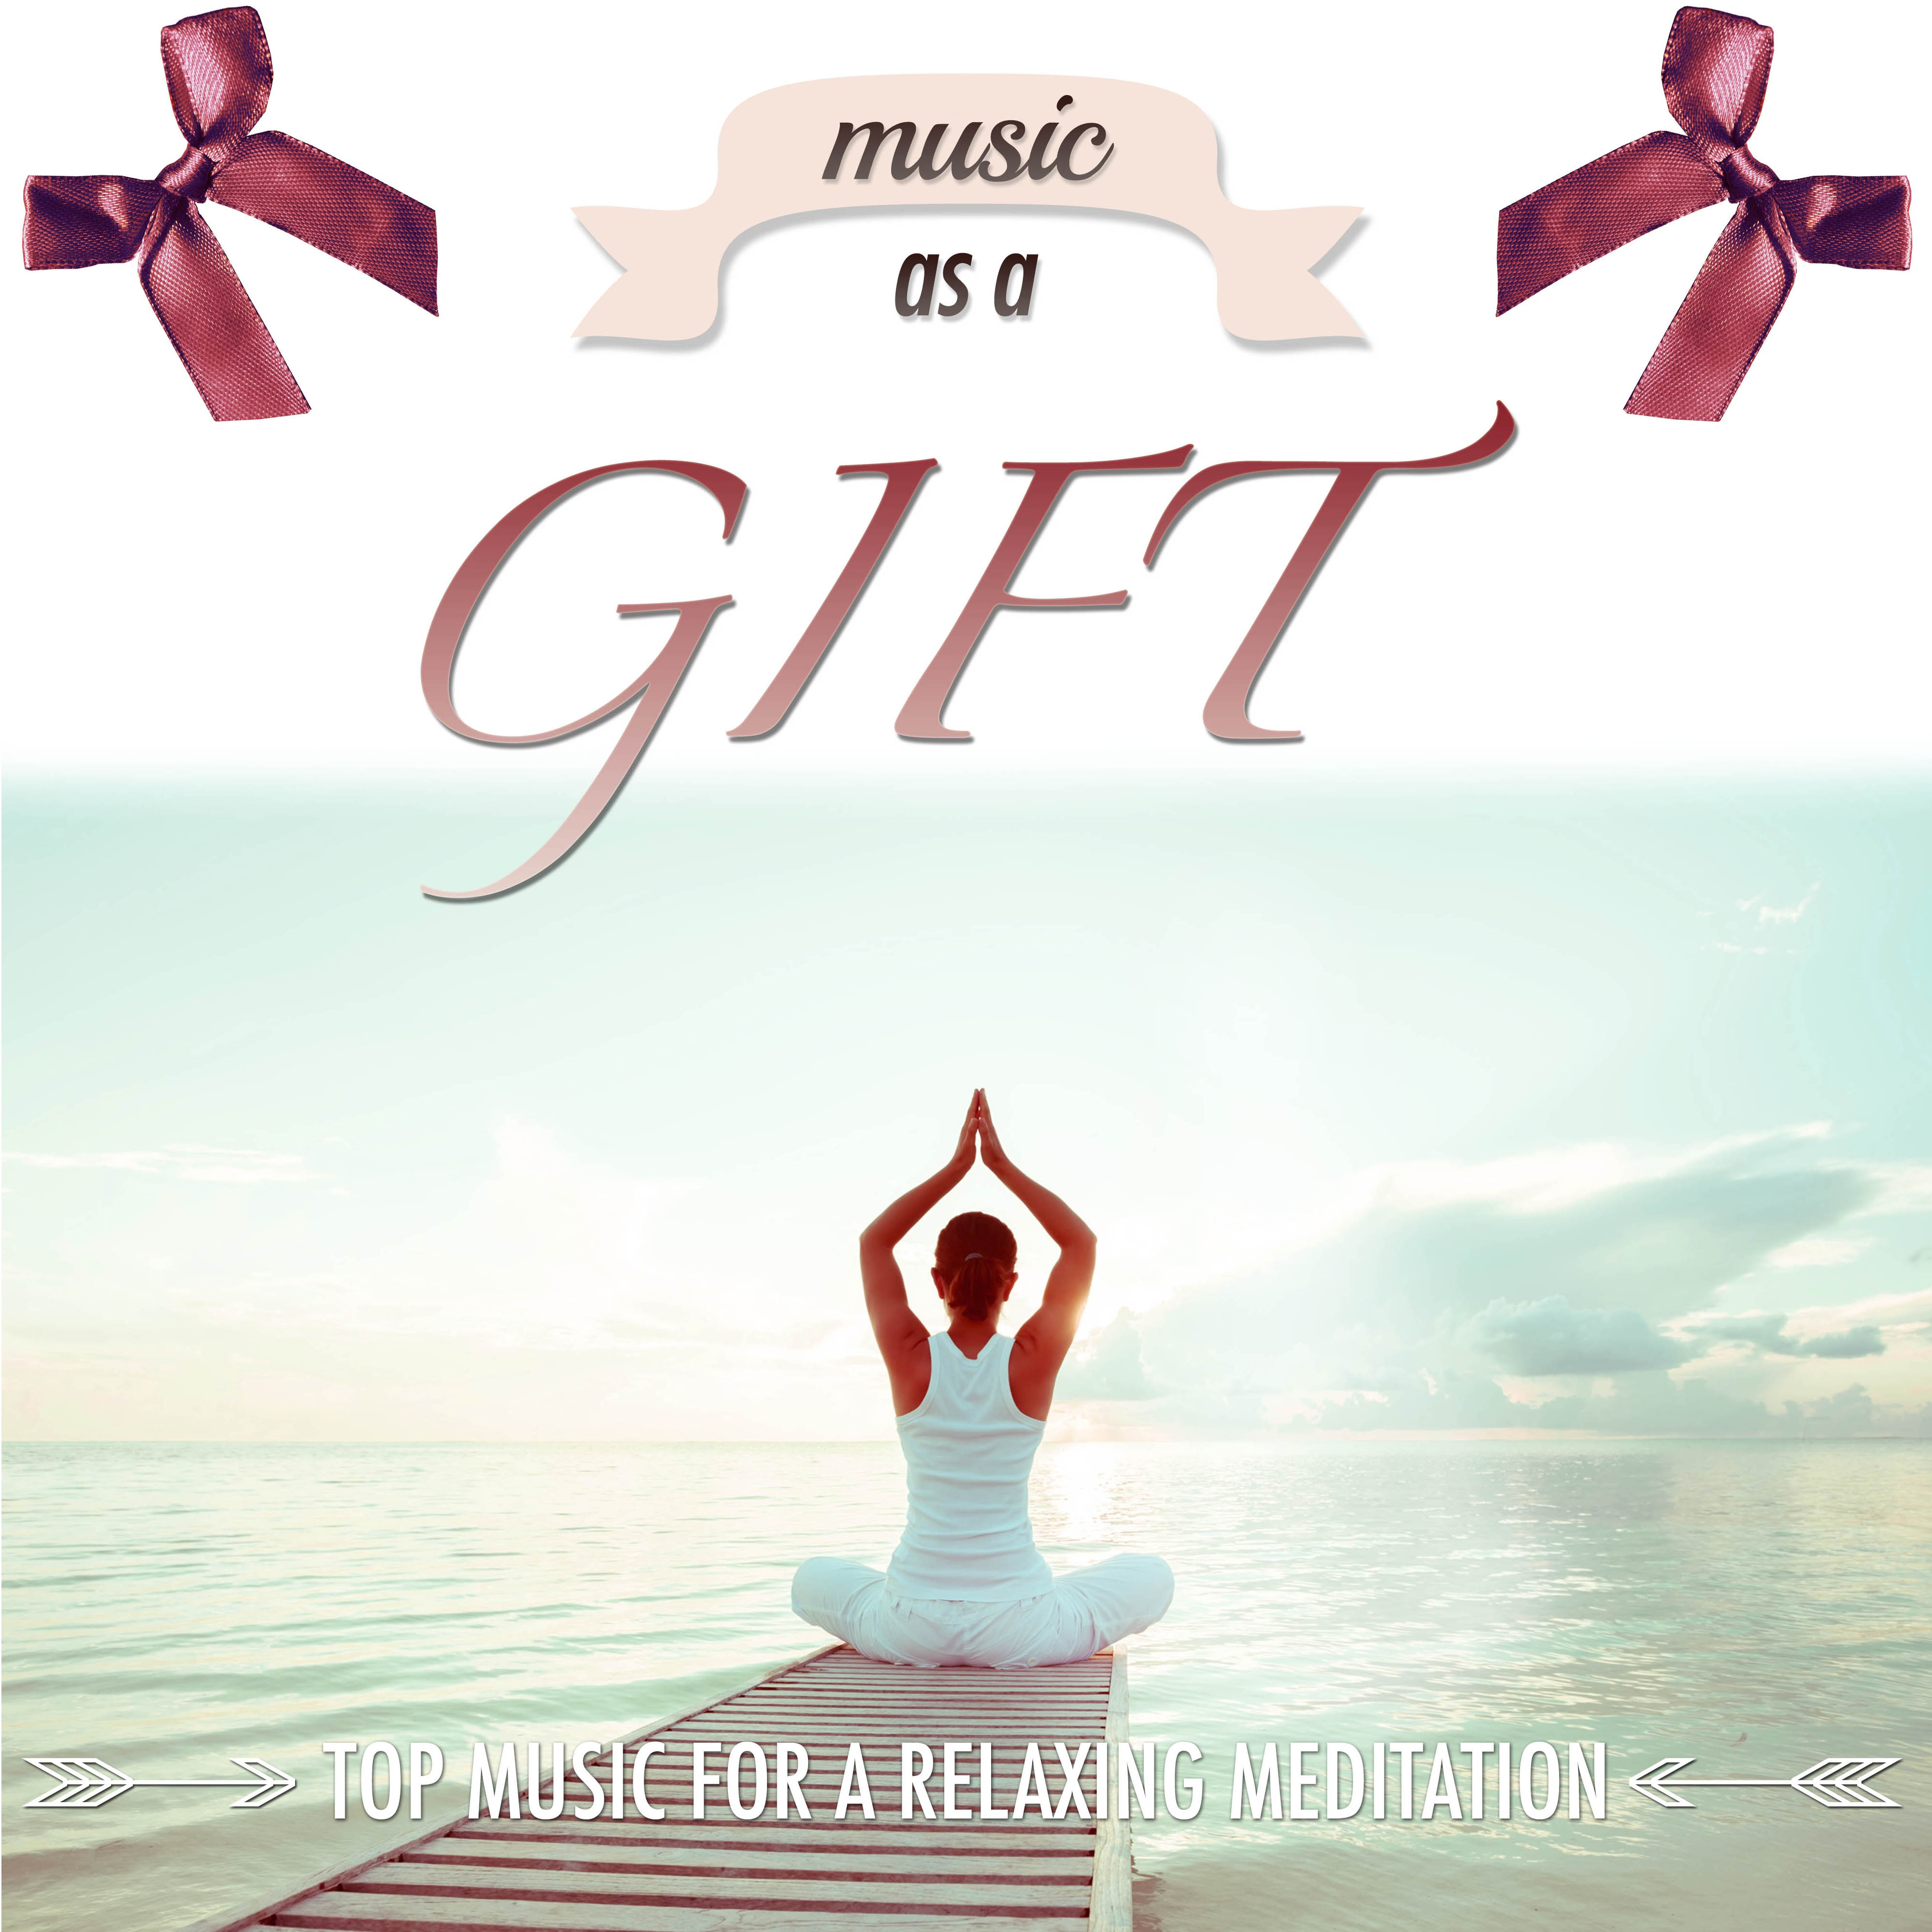 Music as a Gift: Top Music for Deep Meditation, Health and Wellness, with New Age Songs to find Peace, Serenity and Tranquility